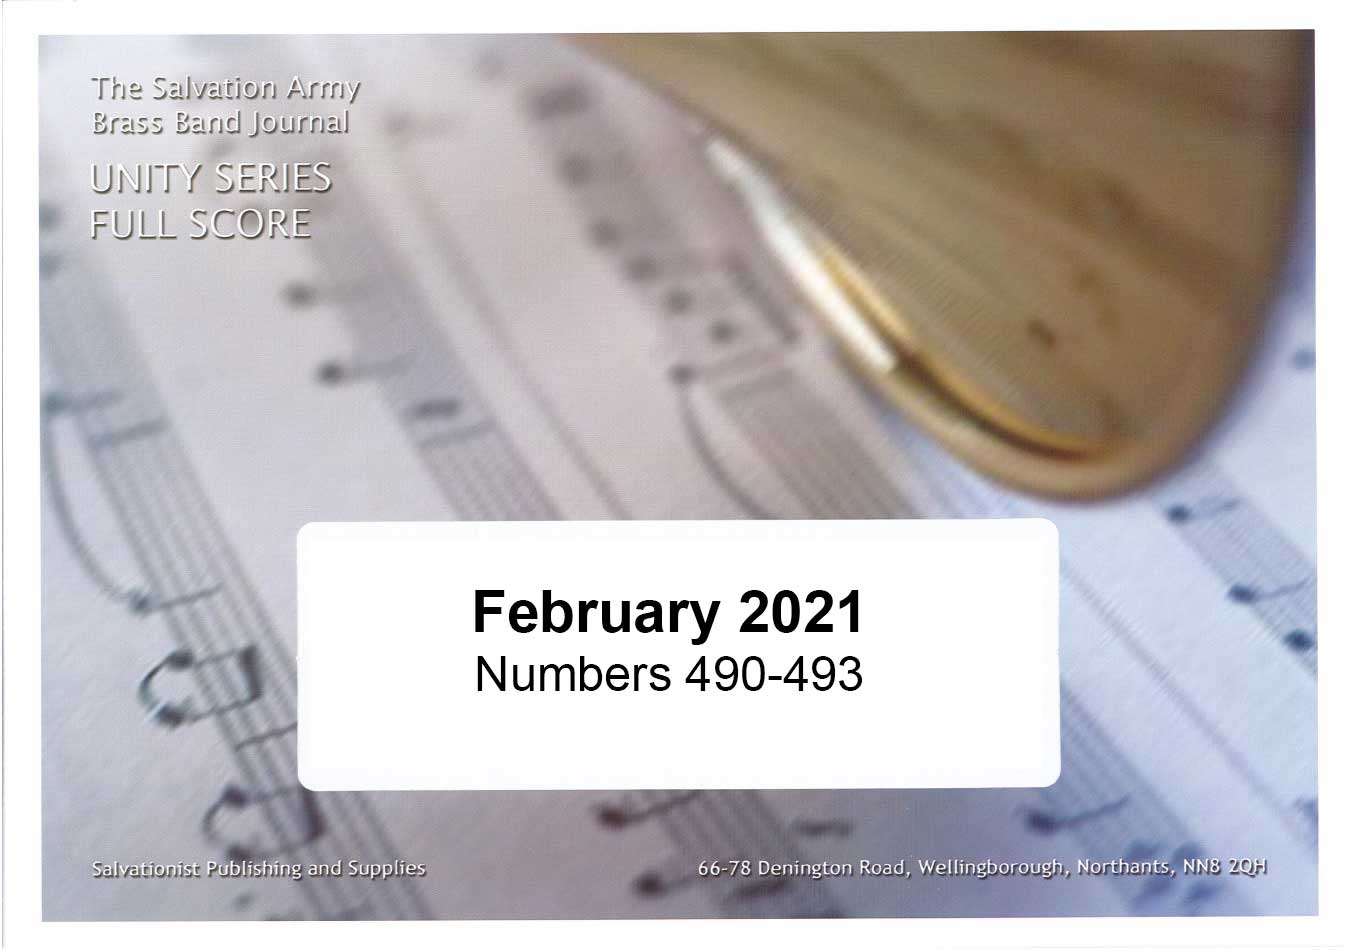 Unity Series Band Journal - Numbers 490 - 493, February 2021